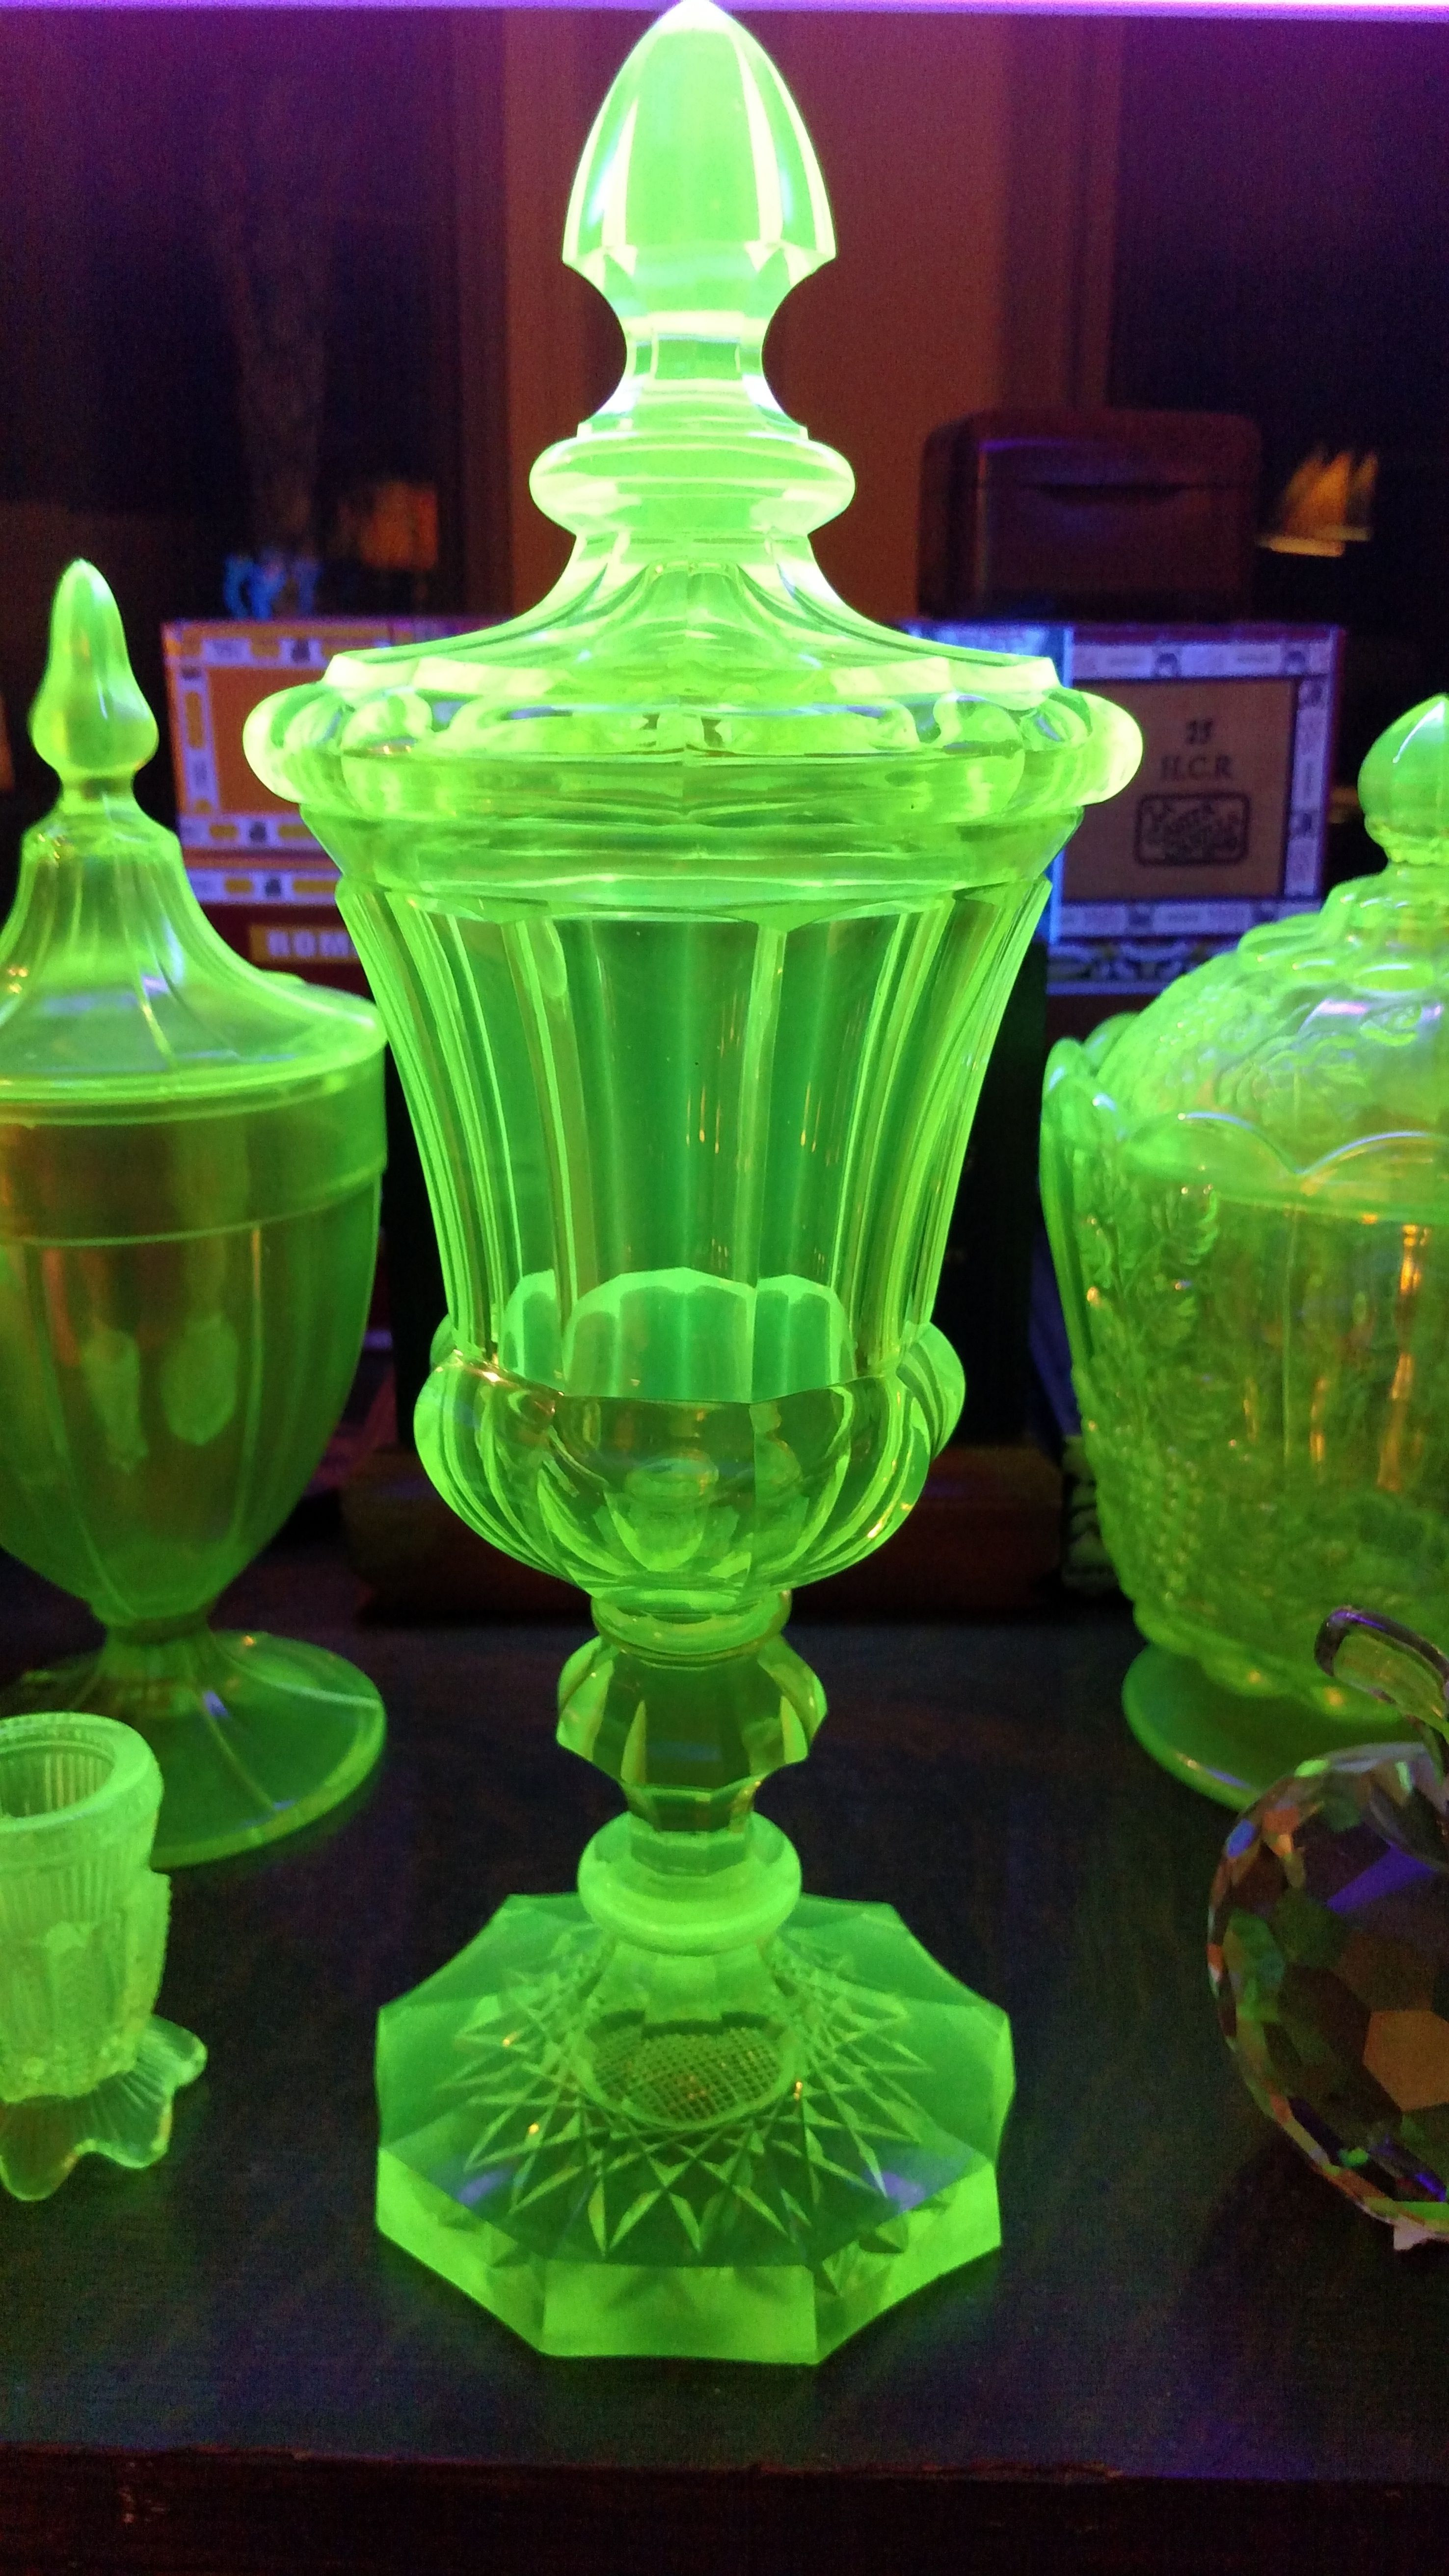 lime green glass vase of pin by tommy serio on dishes pinterest vaseline glass and mid throughout glass containers vaseline depression dishes coloring mid century petroleum jelly dinnerware utensils